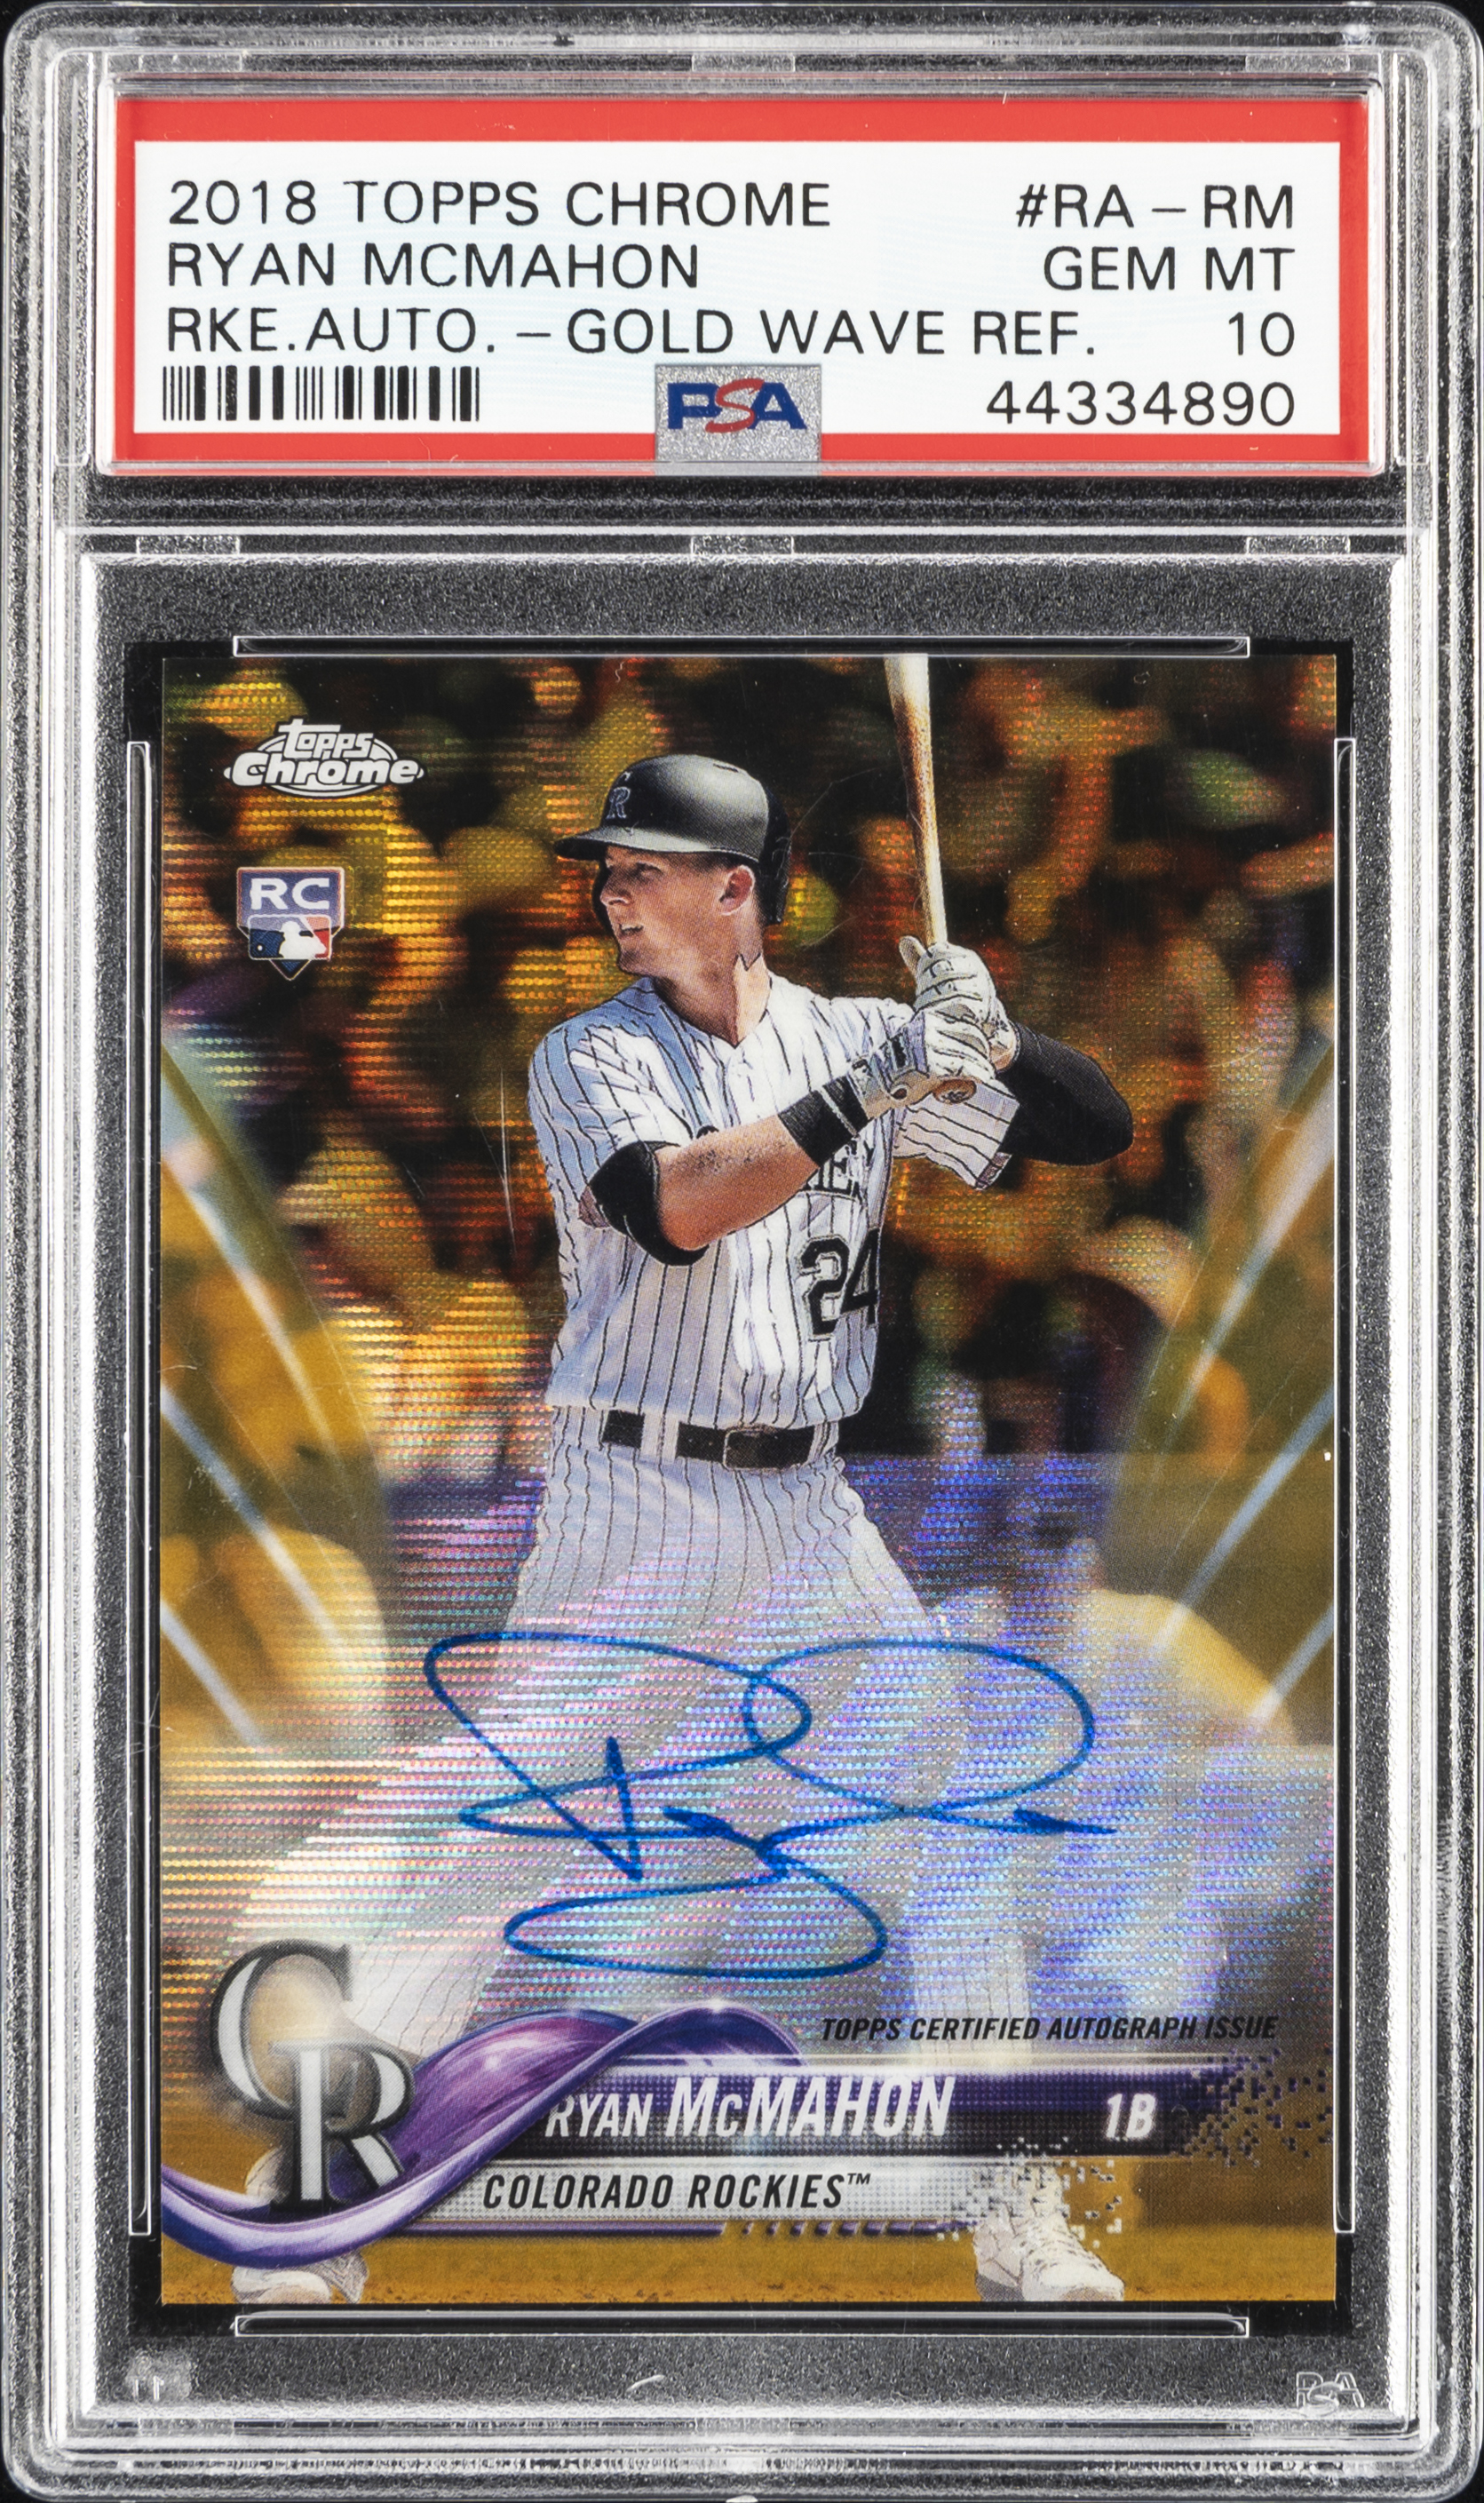 2018 Topps Chrome Rookie Autograph Gold Wave Refractor #RA-RM Ryan Mcmahon Signed Rookie Card (#45/50) – PSA GEM MT 10